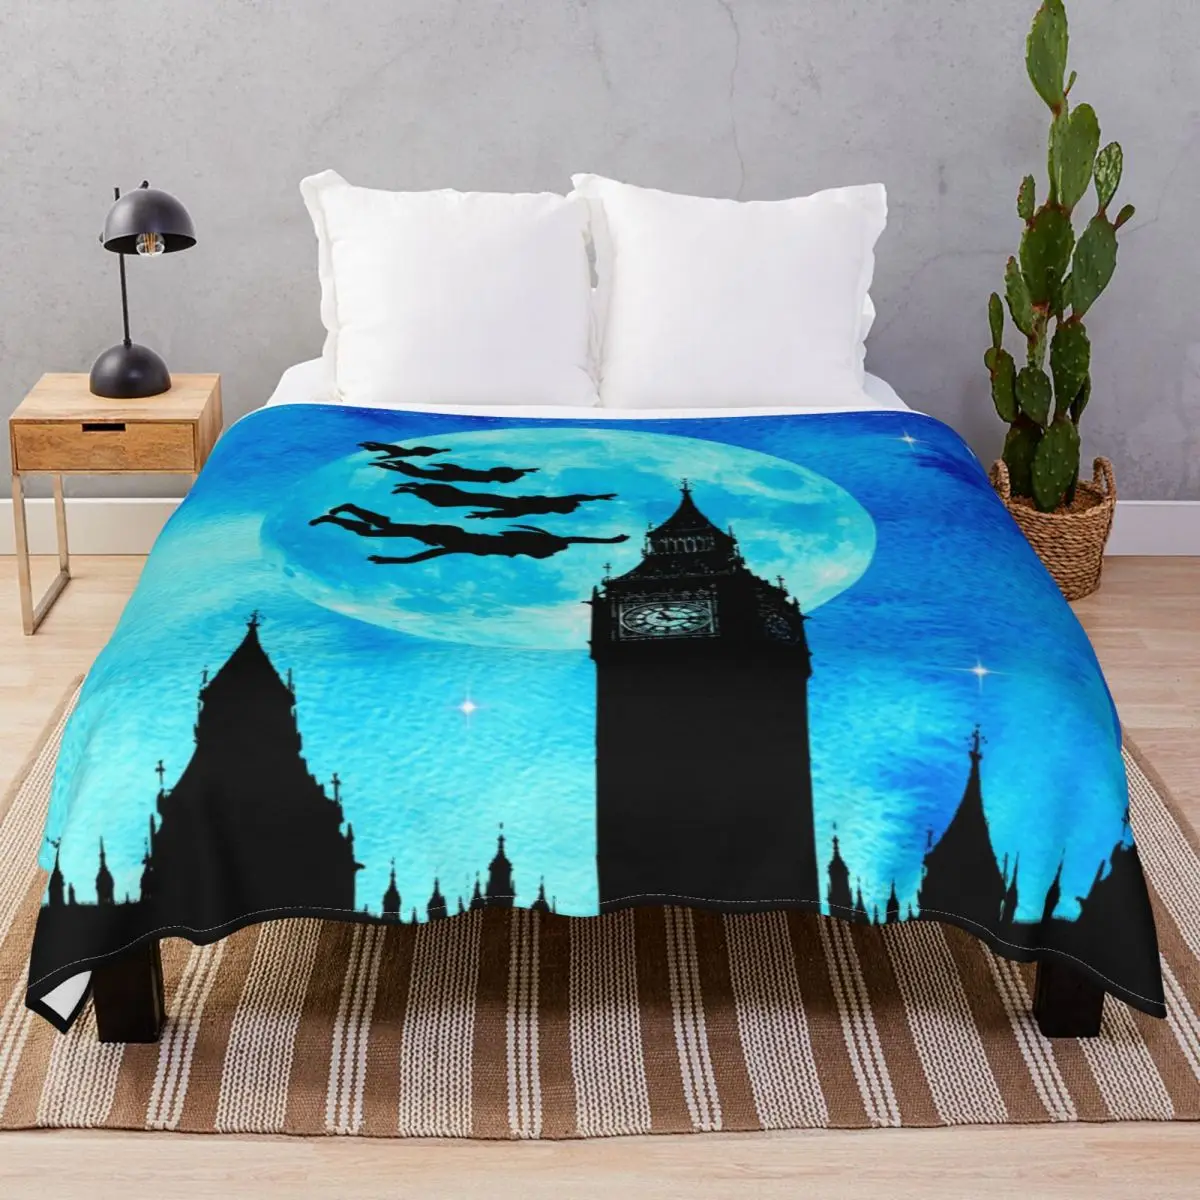 Magical Watercolor Night Peter Pan Blanket Flannel Spring/Autumn Breathable Throw Blankets for Bedding Home Couch Camp Office